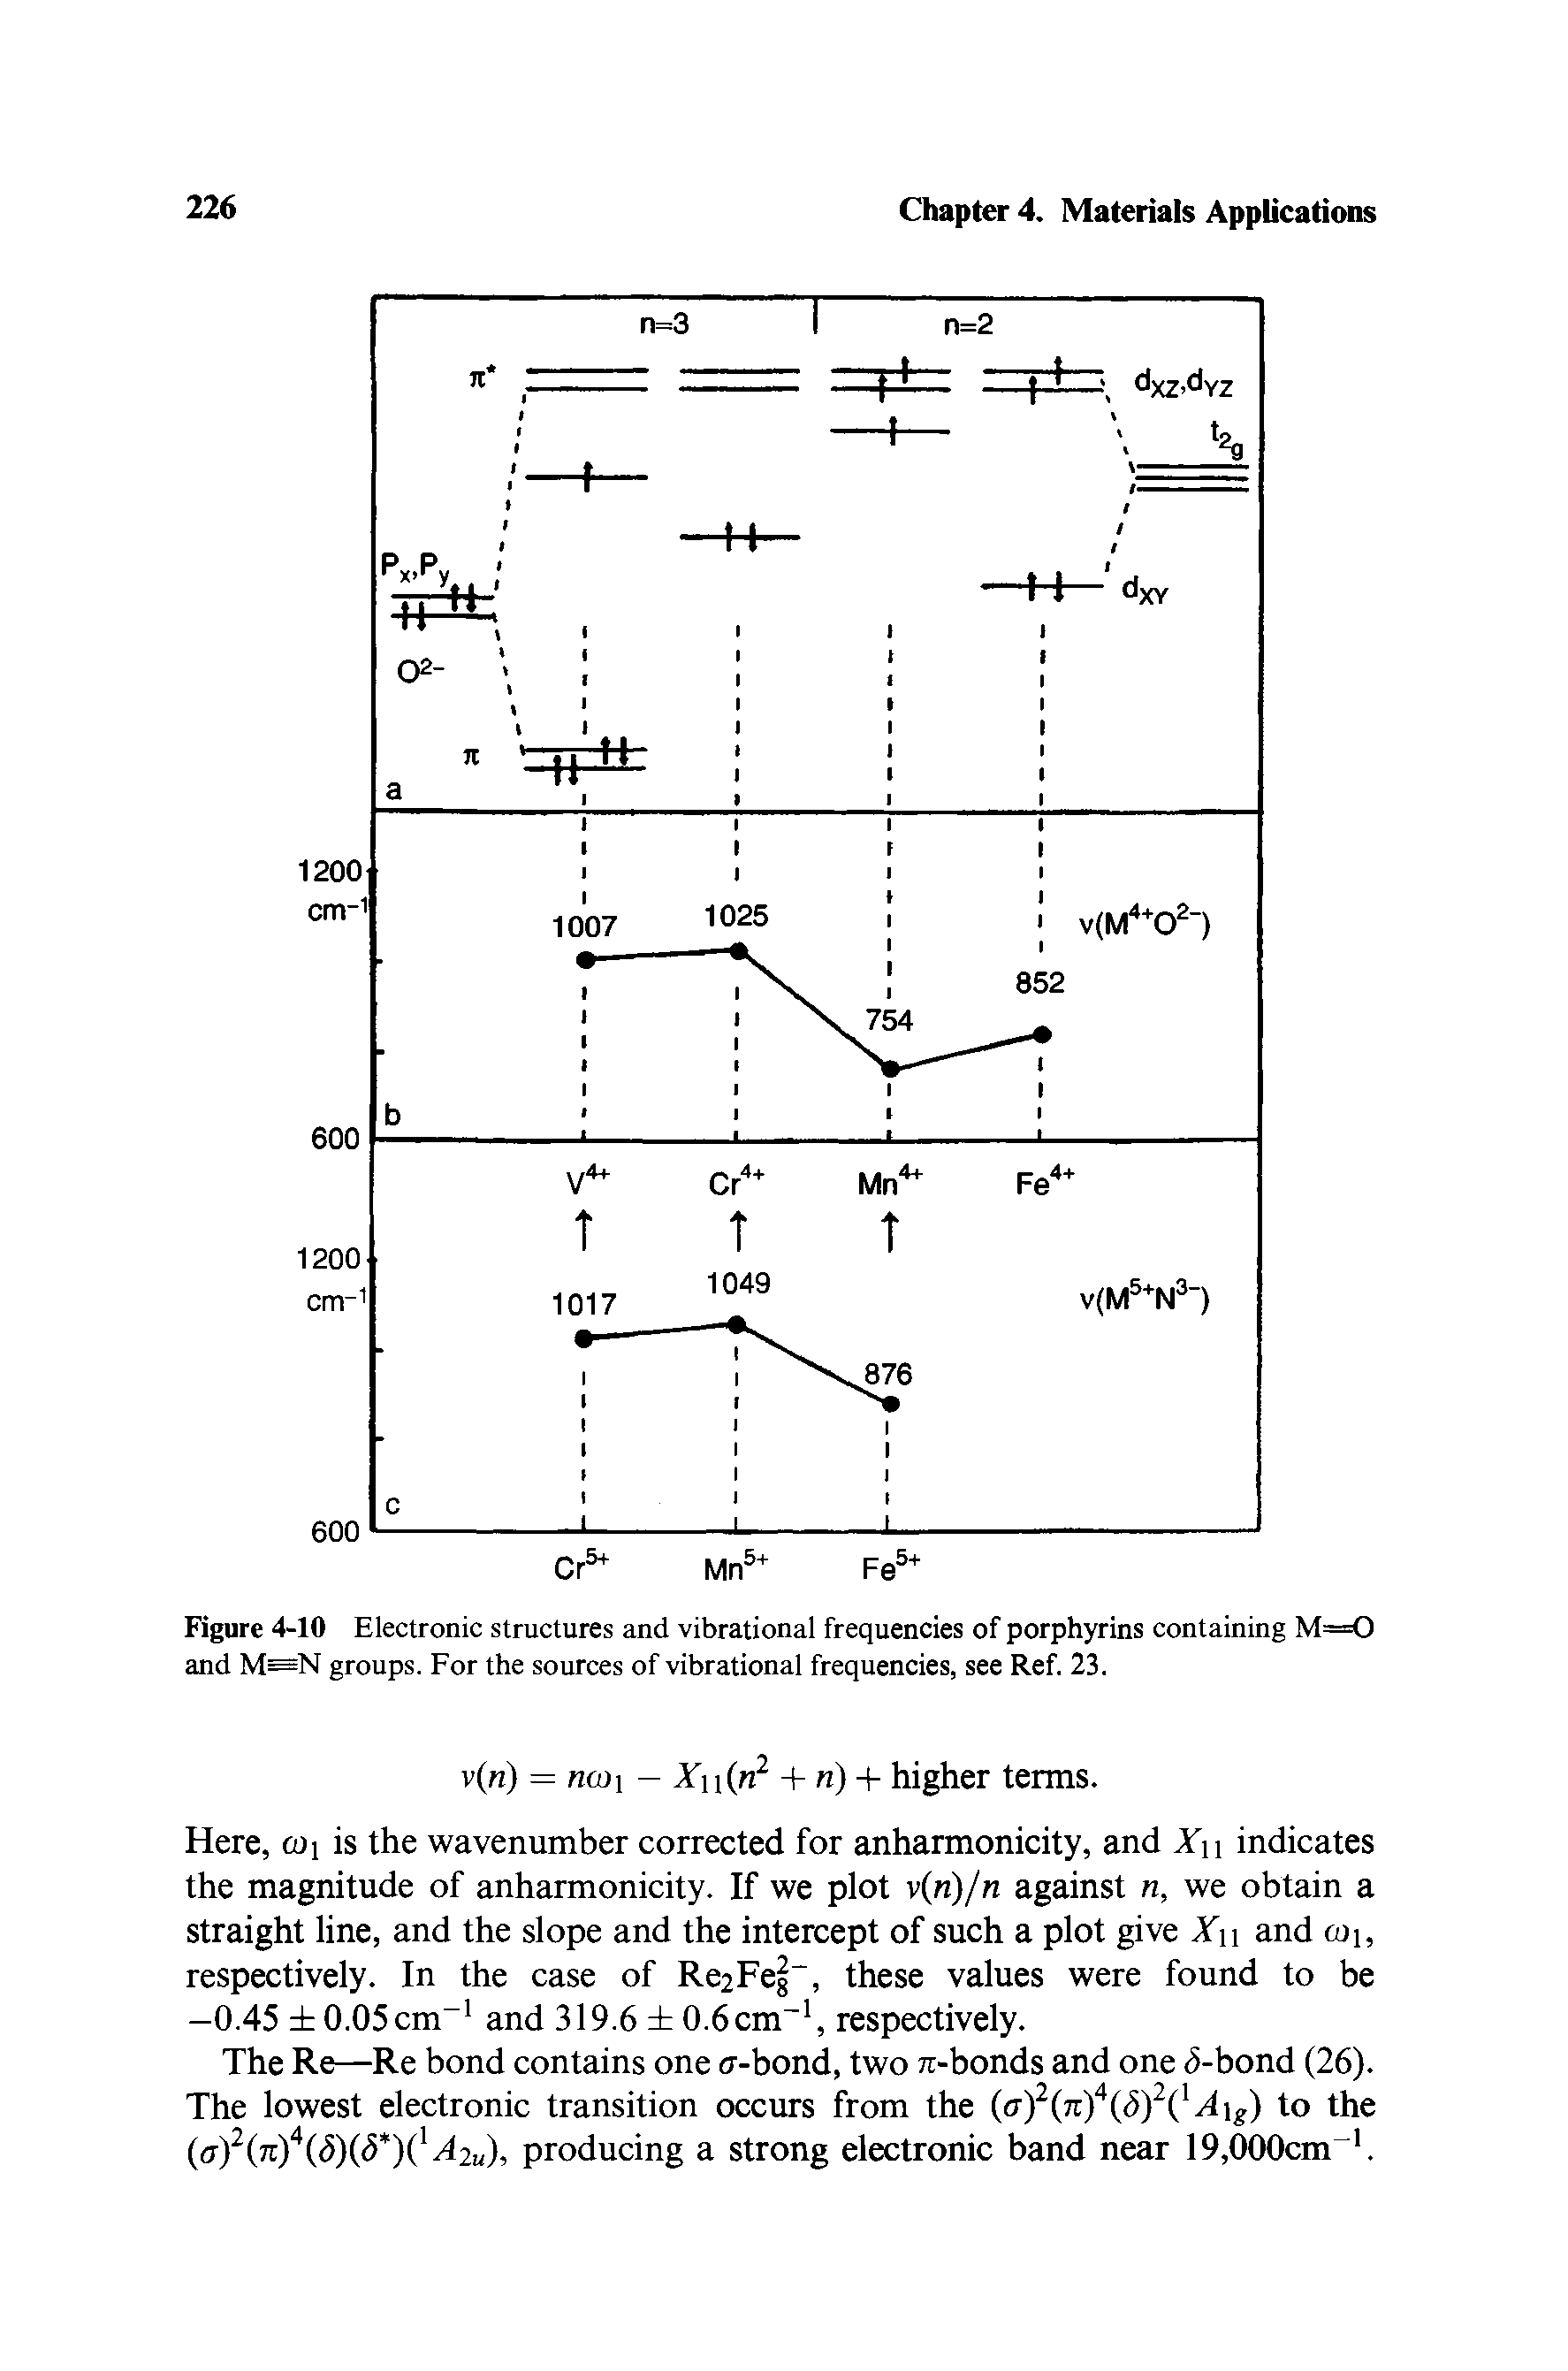 Figure 4-10 Electronic structures and vibrational frequencies of porphyrins containing M=0 and M=N groups. For the sources of vibrational frequencies, see Ref. 23.